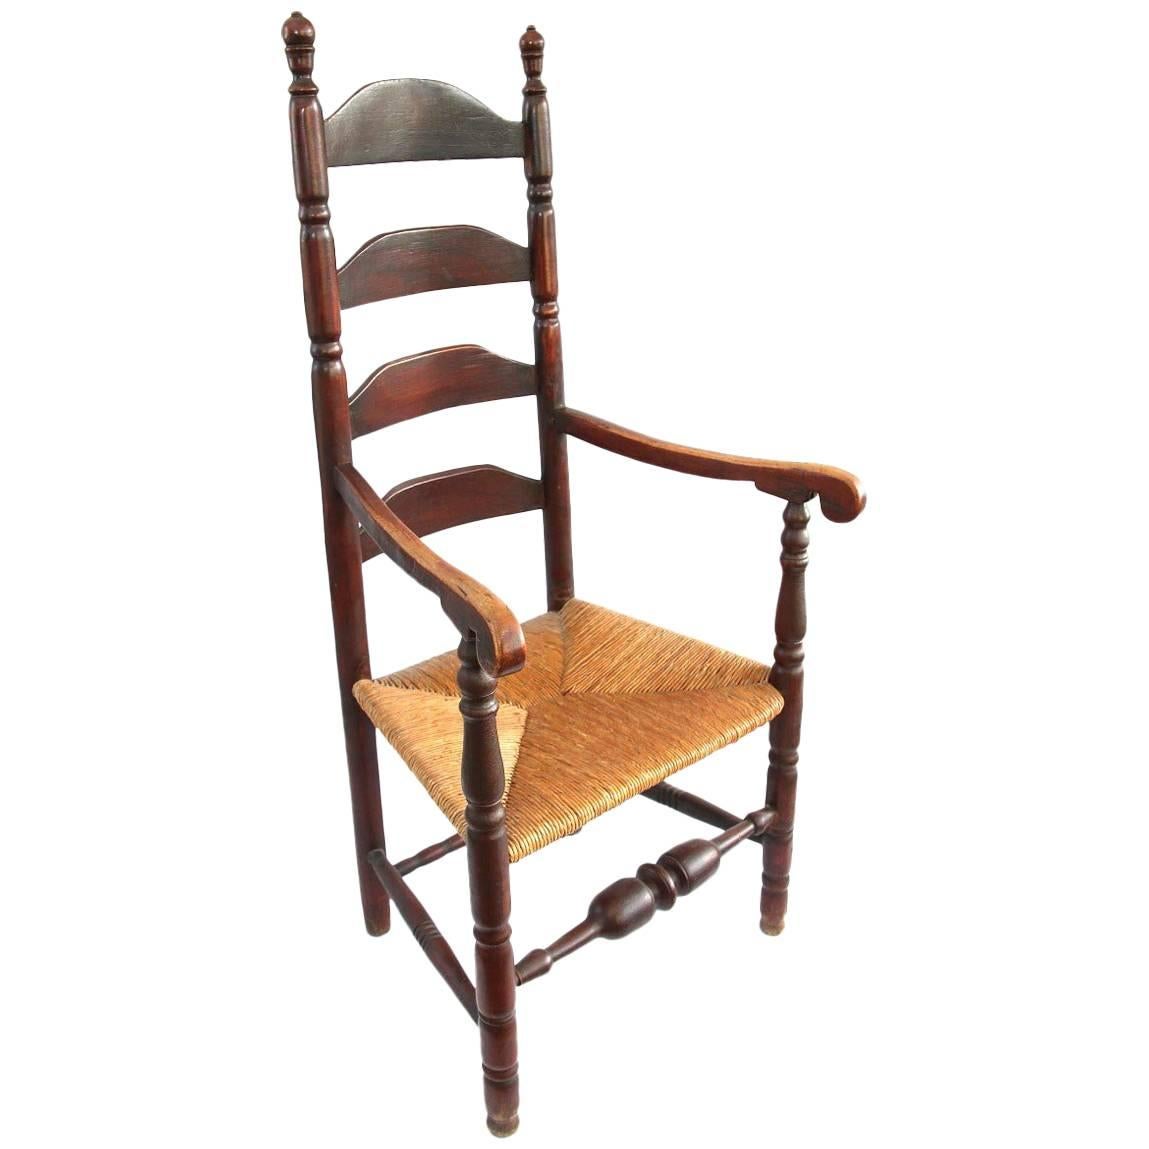 18th Century Coastal Connecticut Ladderback Chair in Original Red Paint For Sale